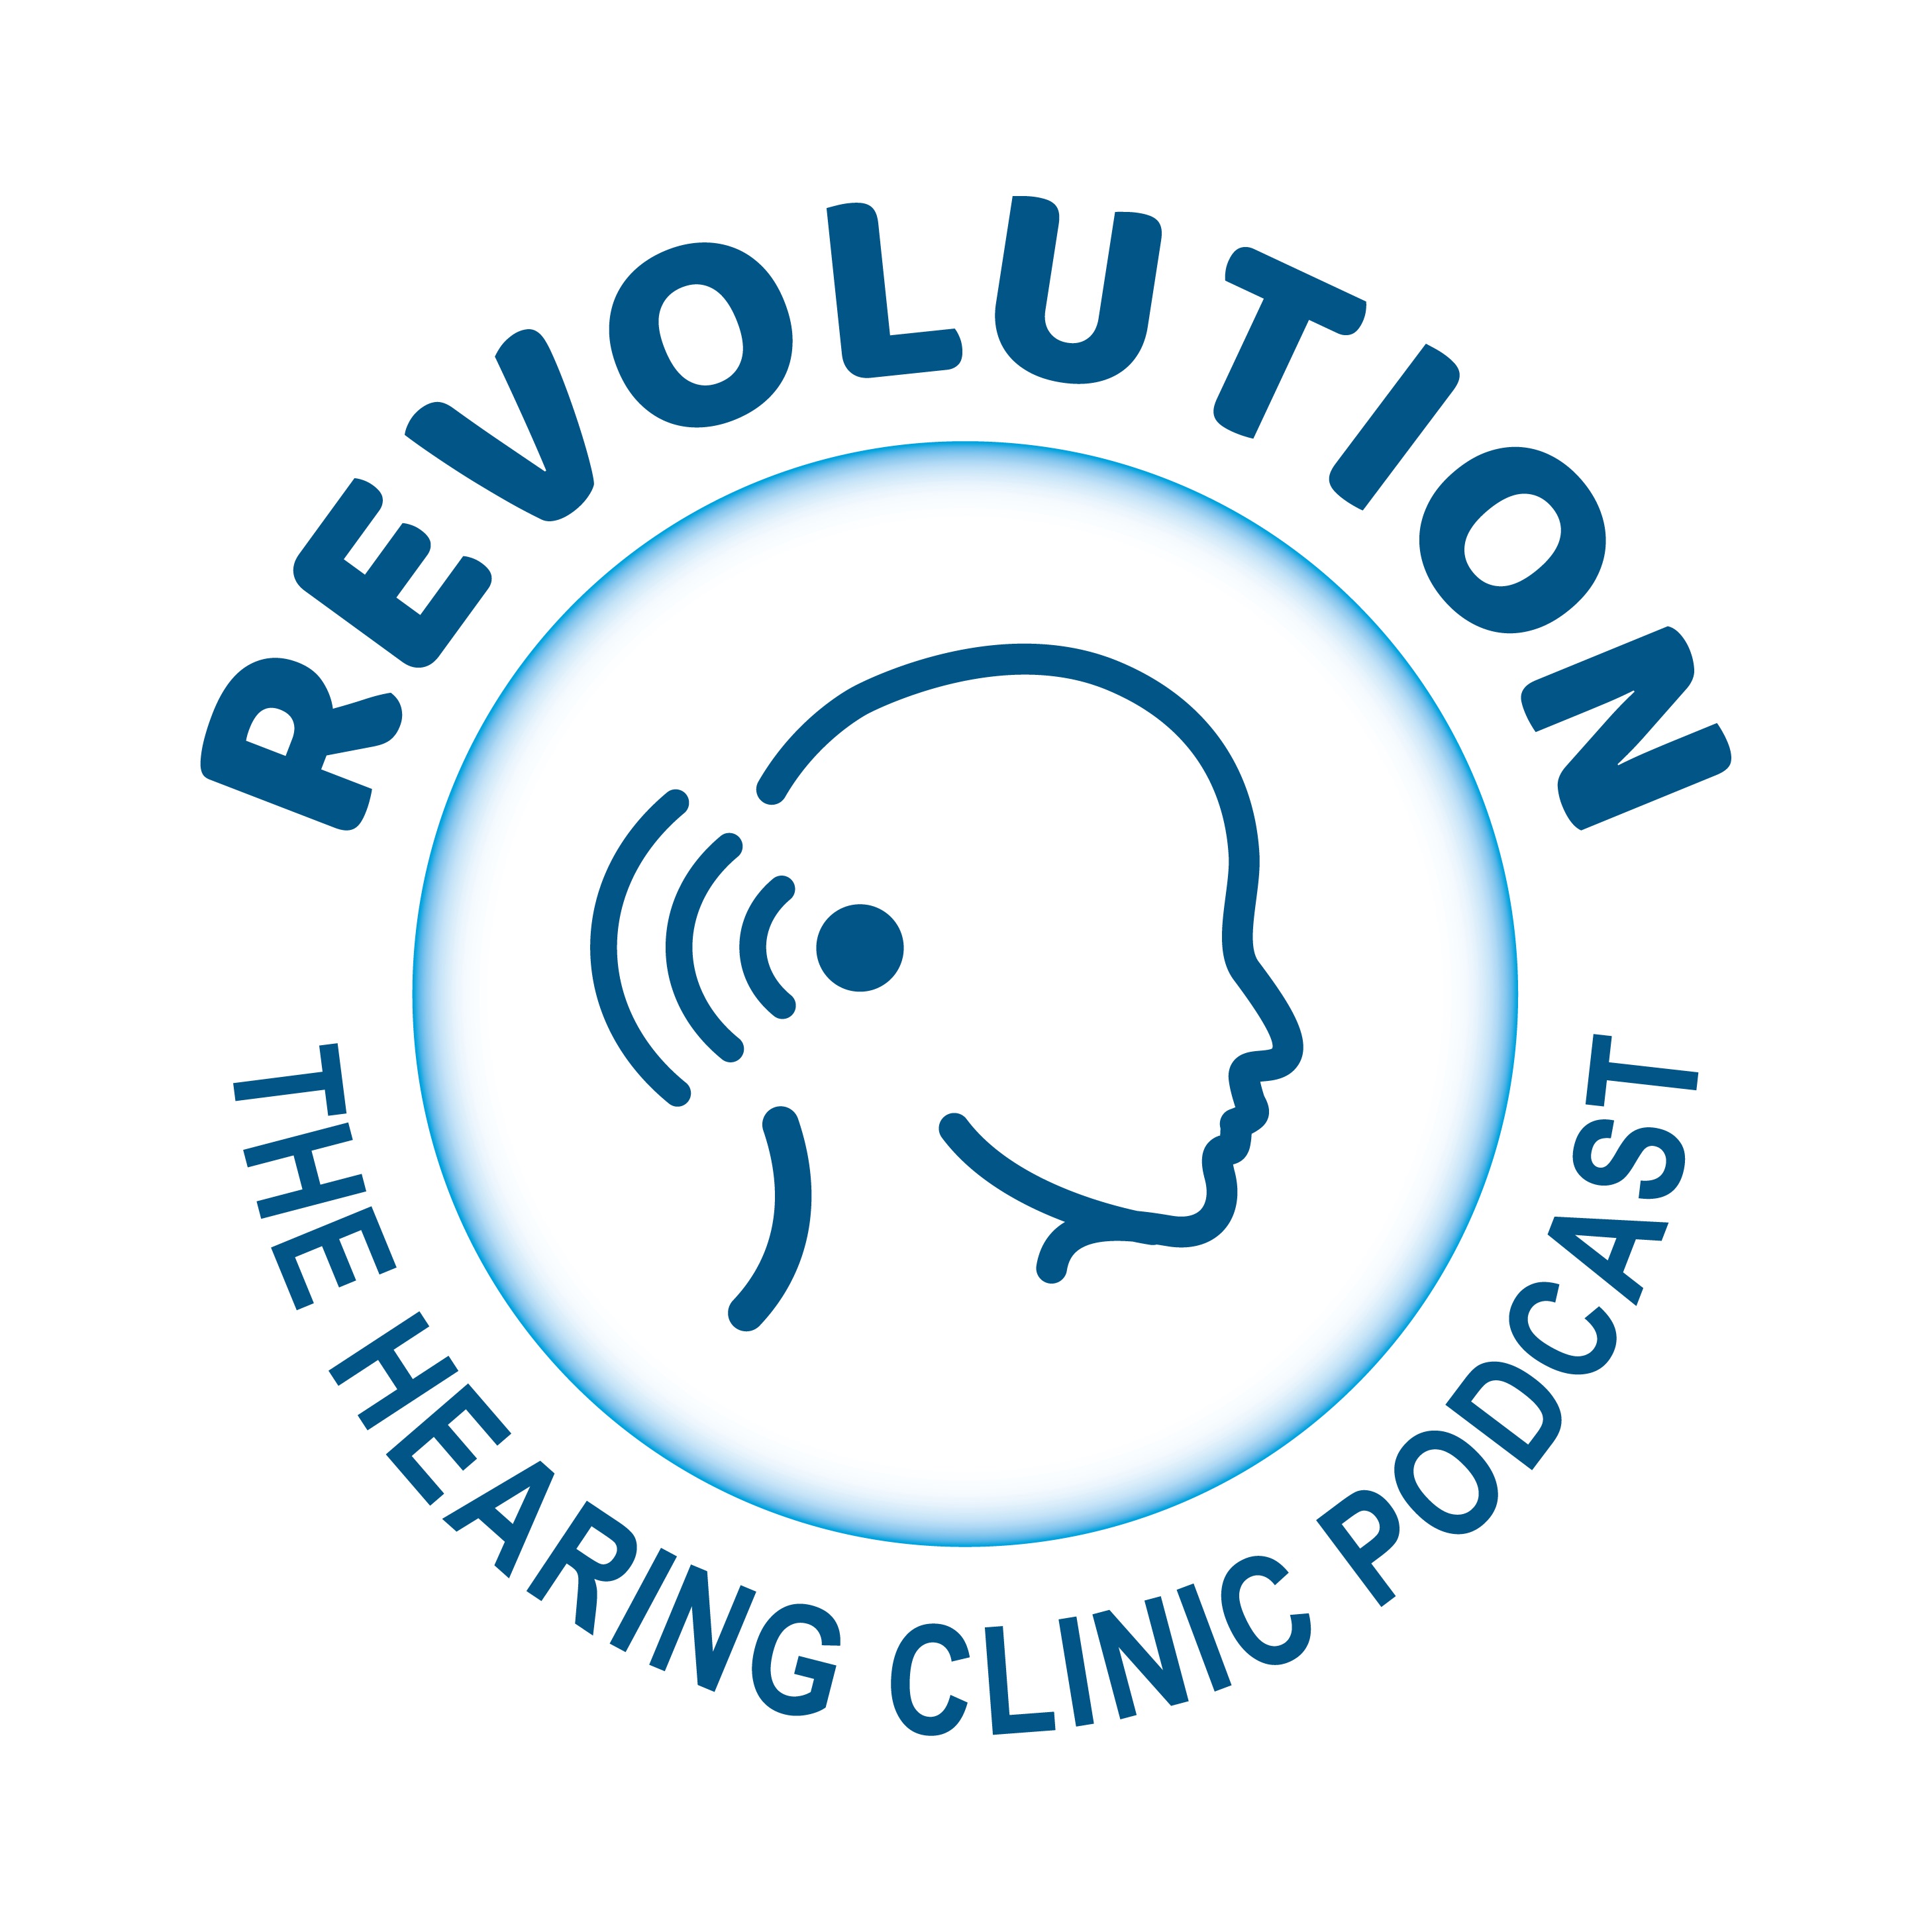 Revolution: The Hearing Clinic Podcast